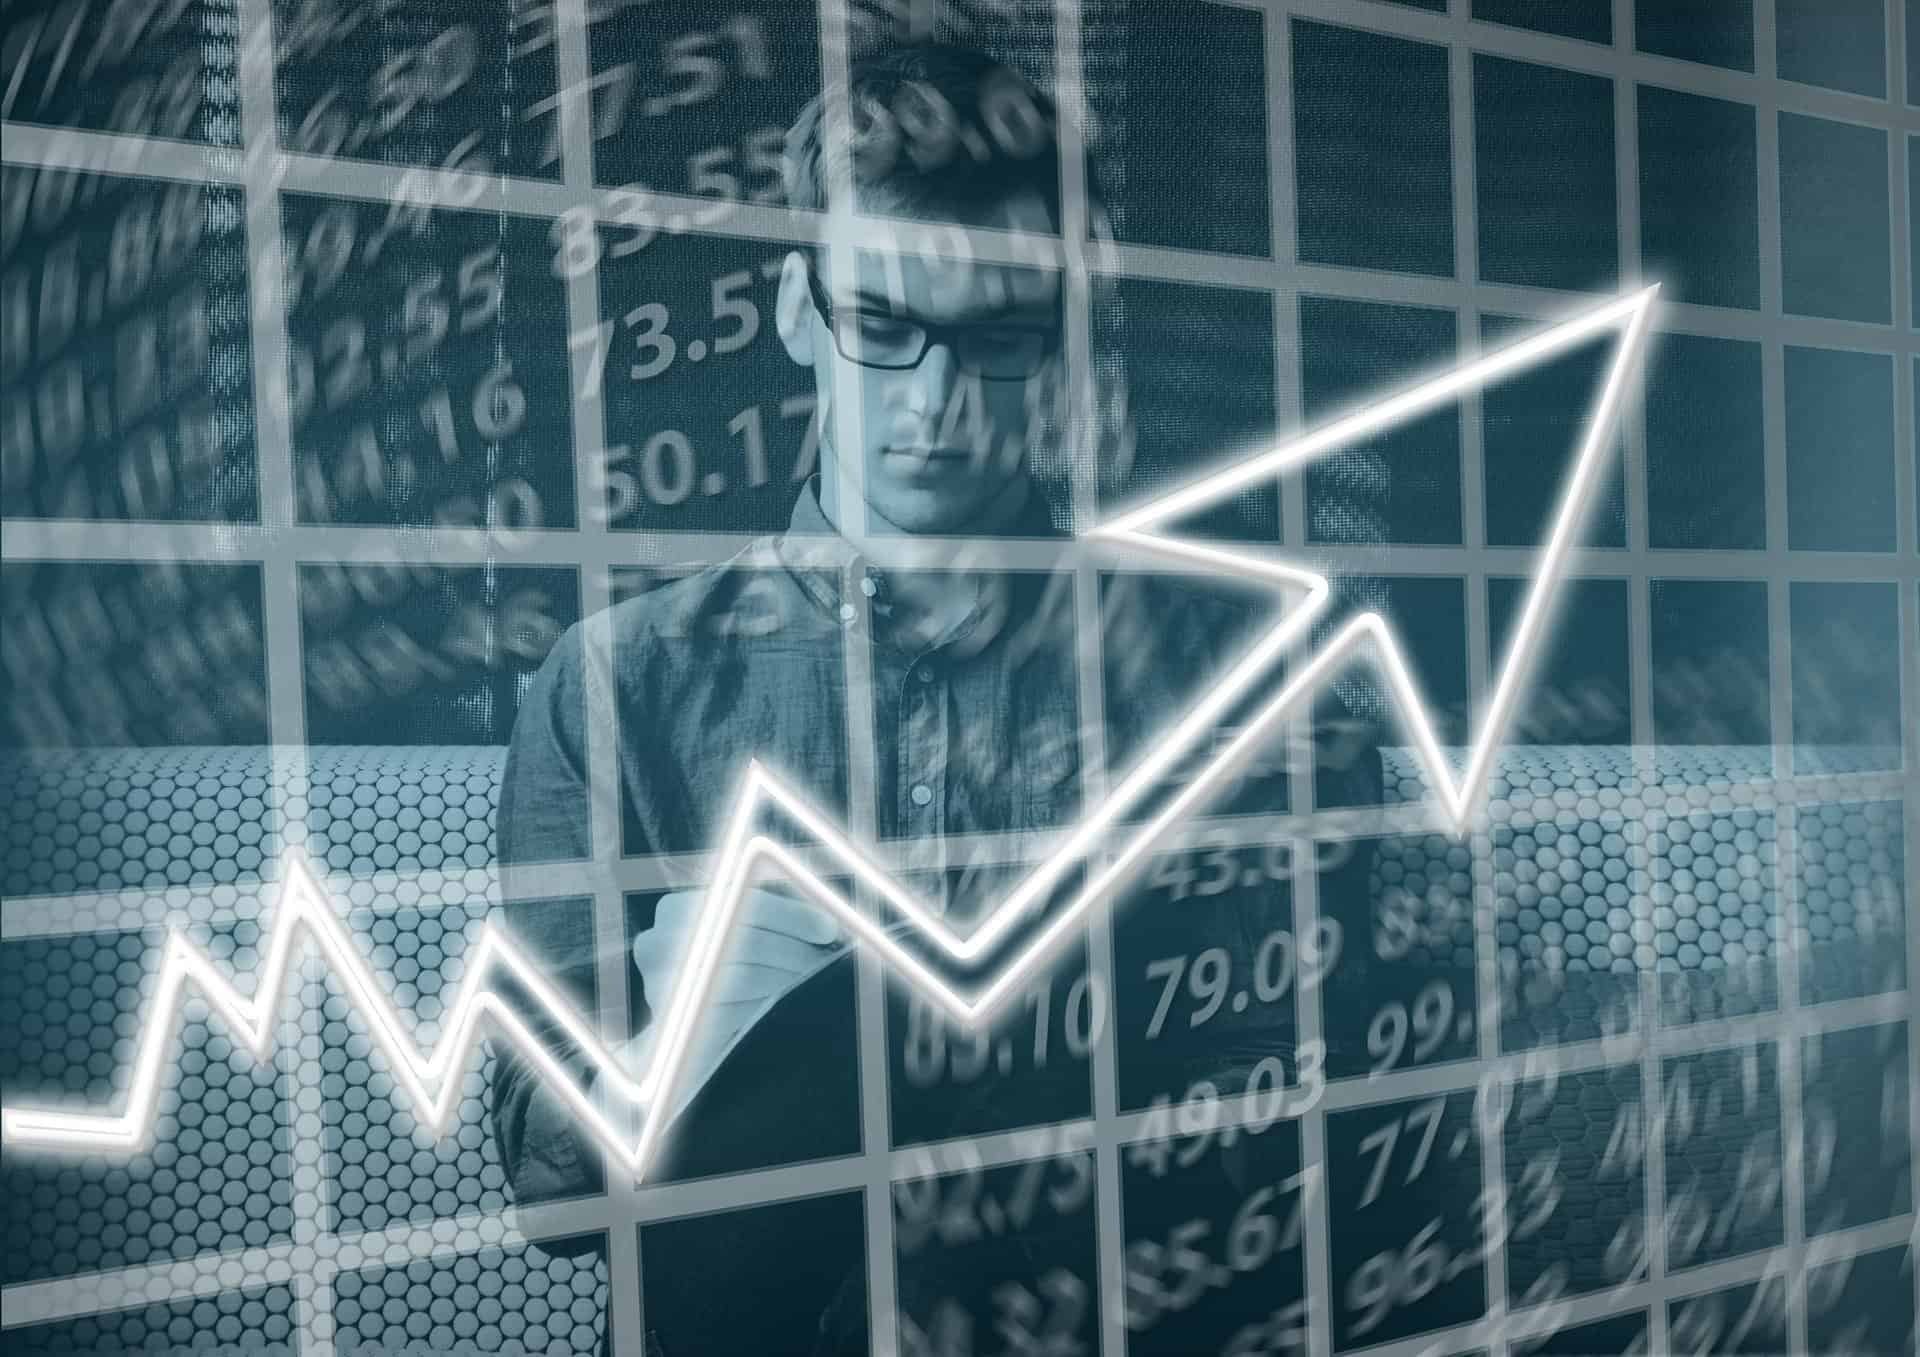 A man who needs books for new investors stands in front of a screen with numbers and an arrow point up.